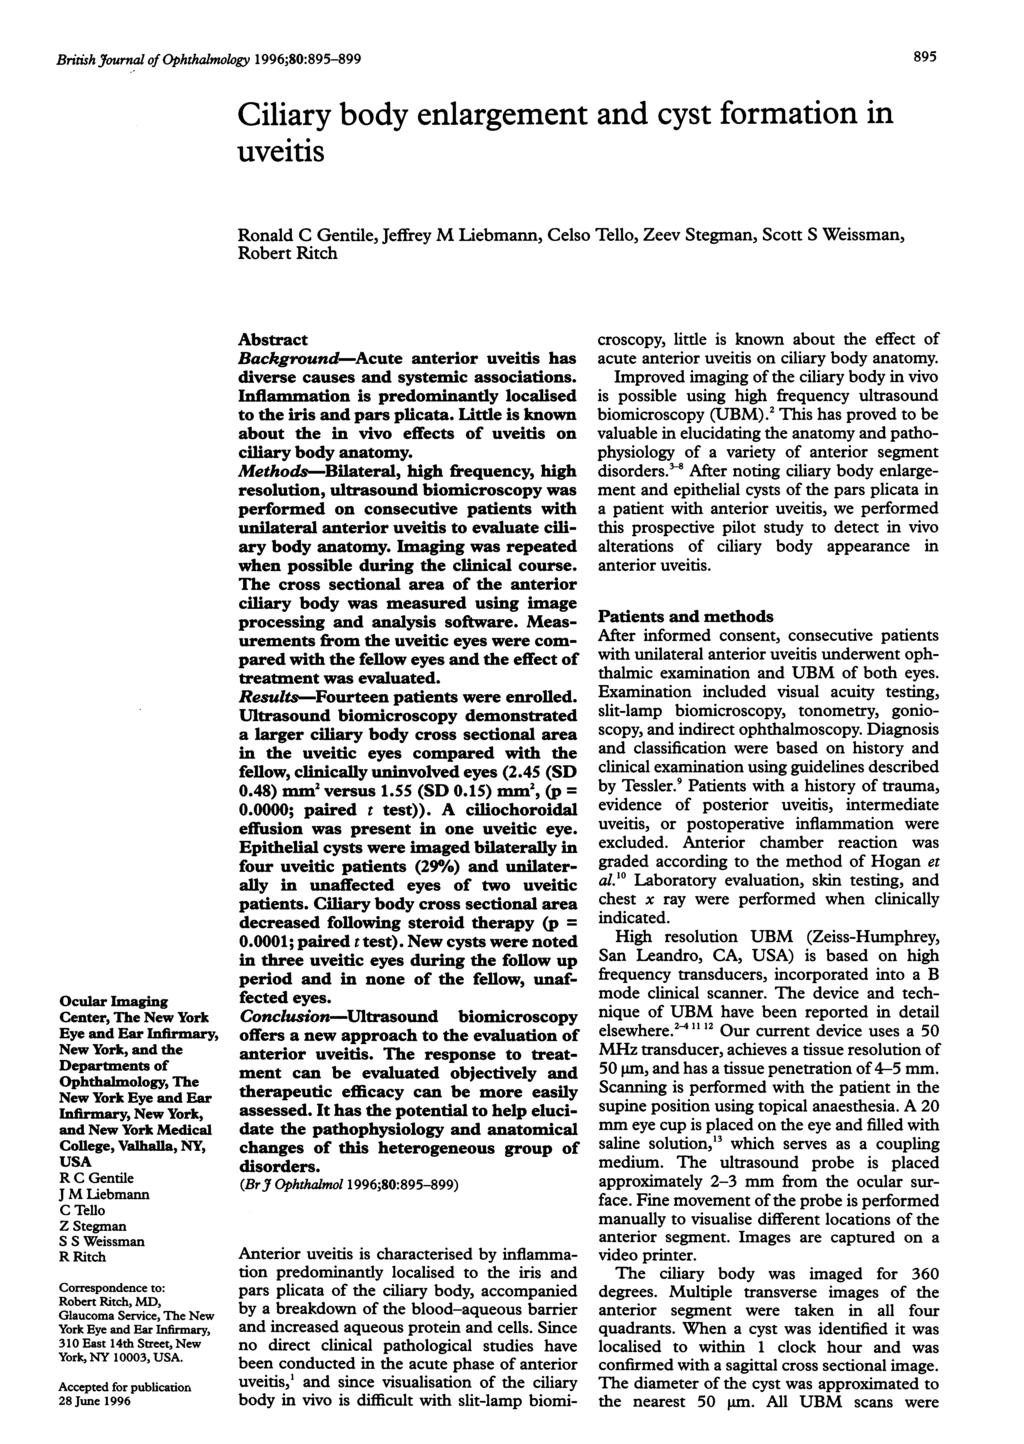 British Journal of Ophthalmology 1996;80:895-899 Ocular Imnaging Center, The New York Eye and Ear Infirmary, New York, and the Departments of Ophthalmology, The New York Eye and Ear Infirmary, New